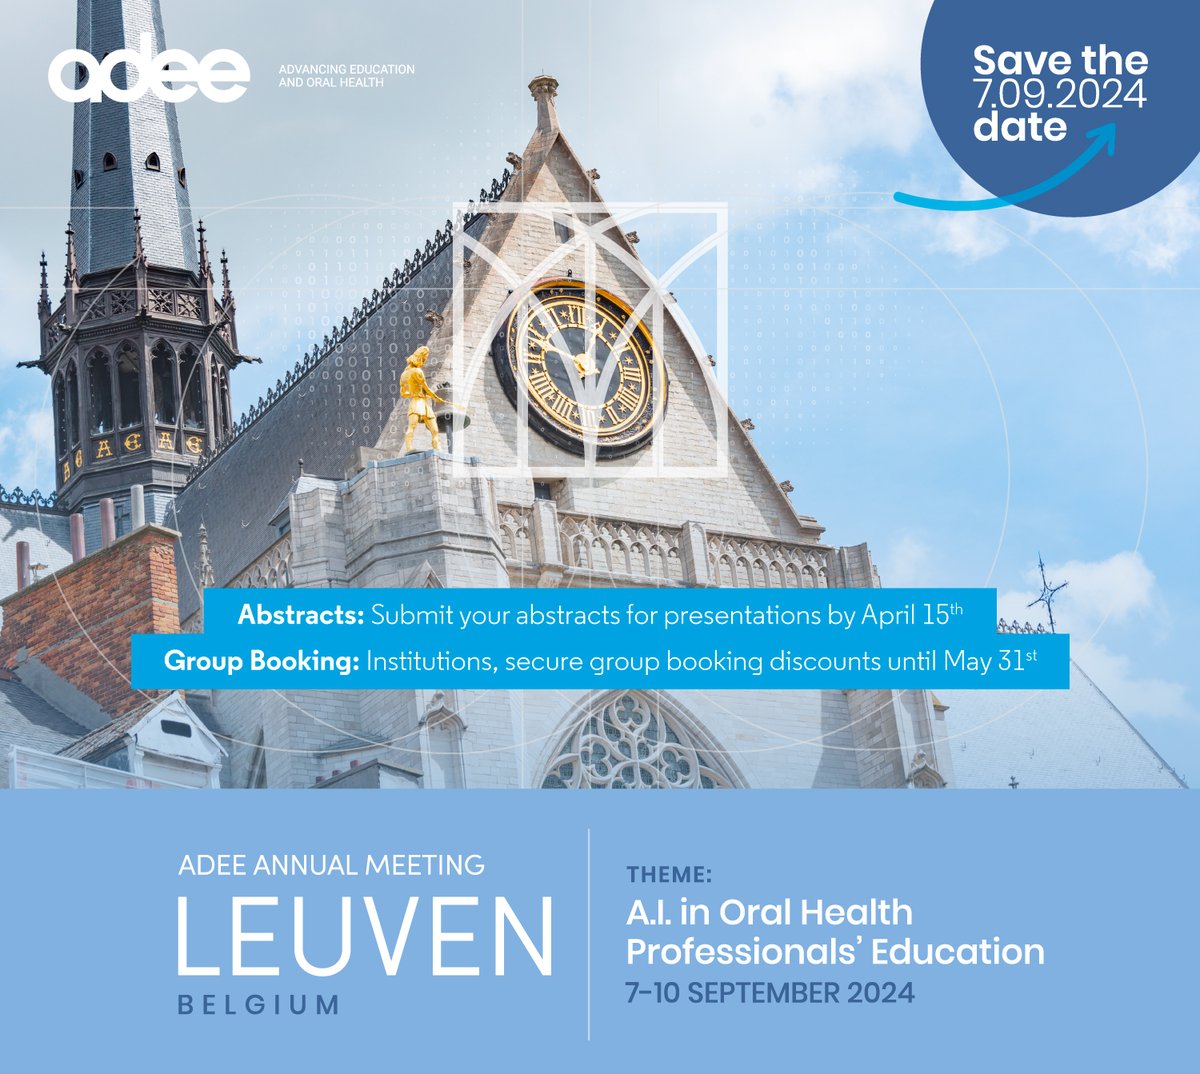 Our January Newsletter is available for consultation: adee.org/january-2024. ADEE 2024 Leuven: Submit your abstracts by April 15th. Institutions, secure group booking discounts until May 31st via administrator@adee.org #Adee #Leuven2024 #AdeeAnnualMeeting #CallforAbstracts